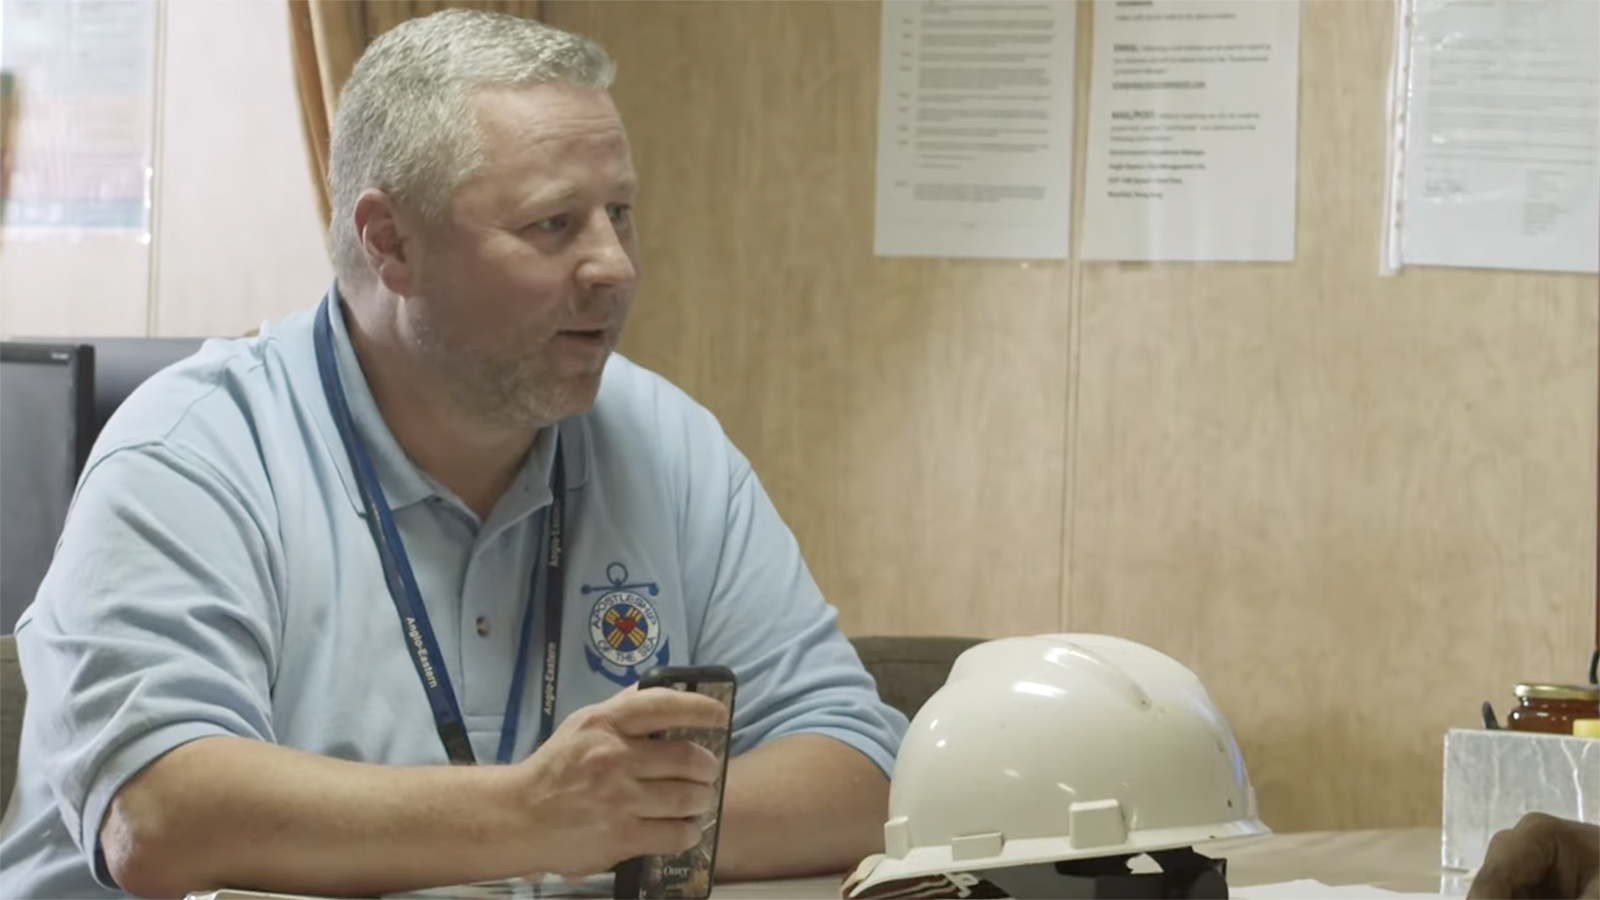 Andy Middleton, director of the Archdiocese of Baltimore’s Apostleship of the Sea, meets with seafarers. (Video screen grab)